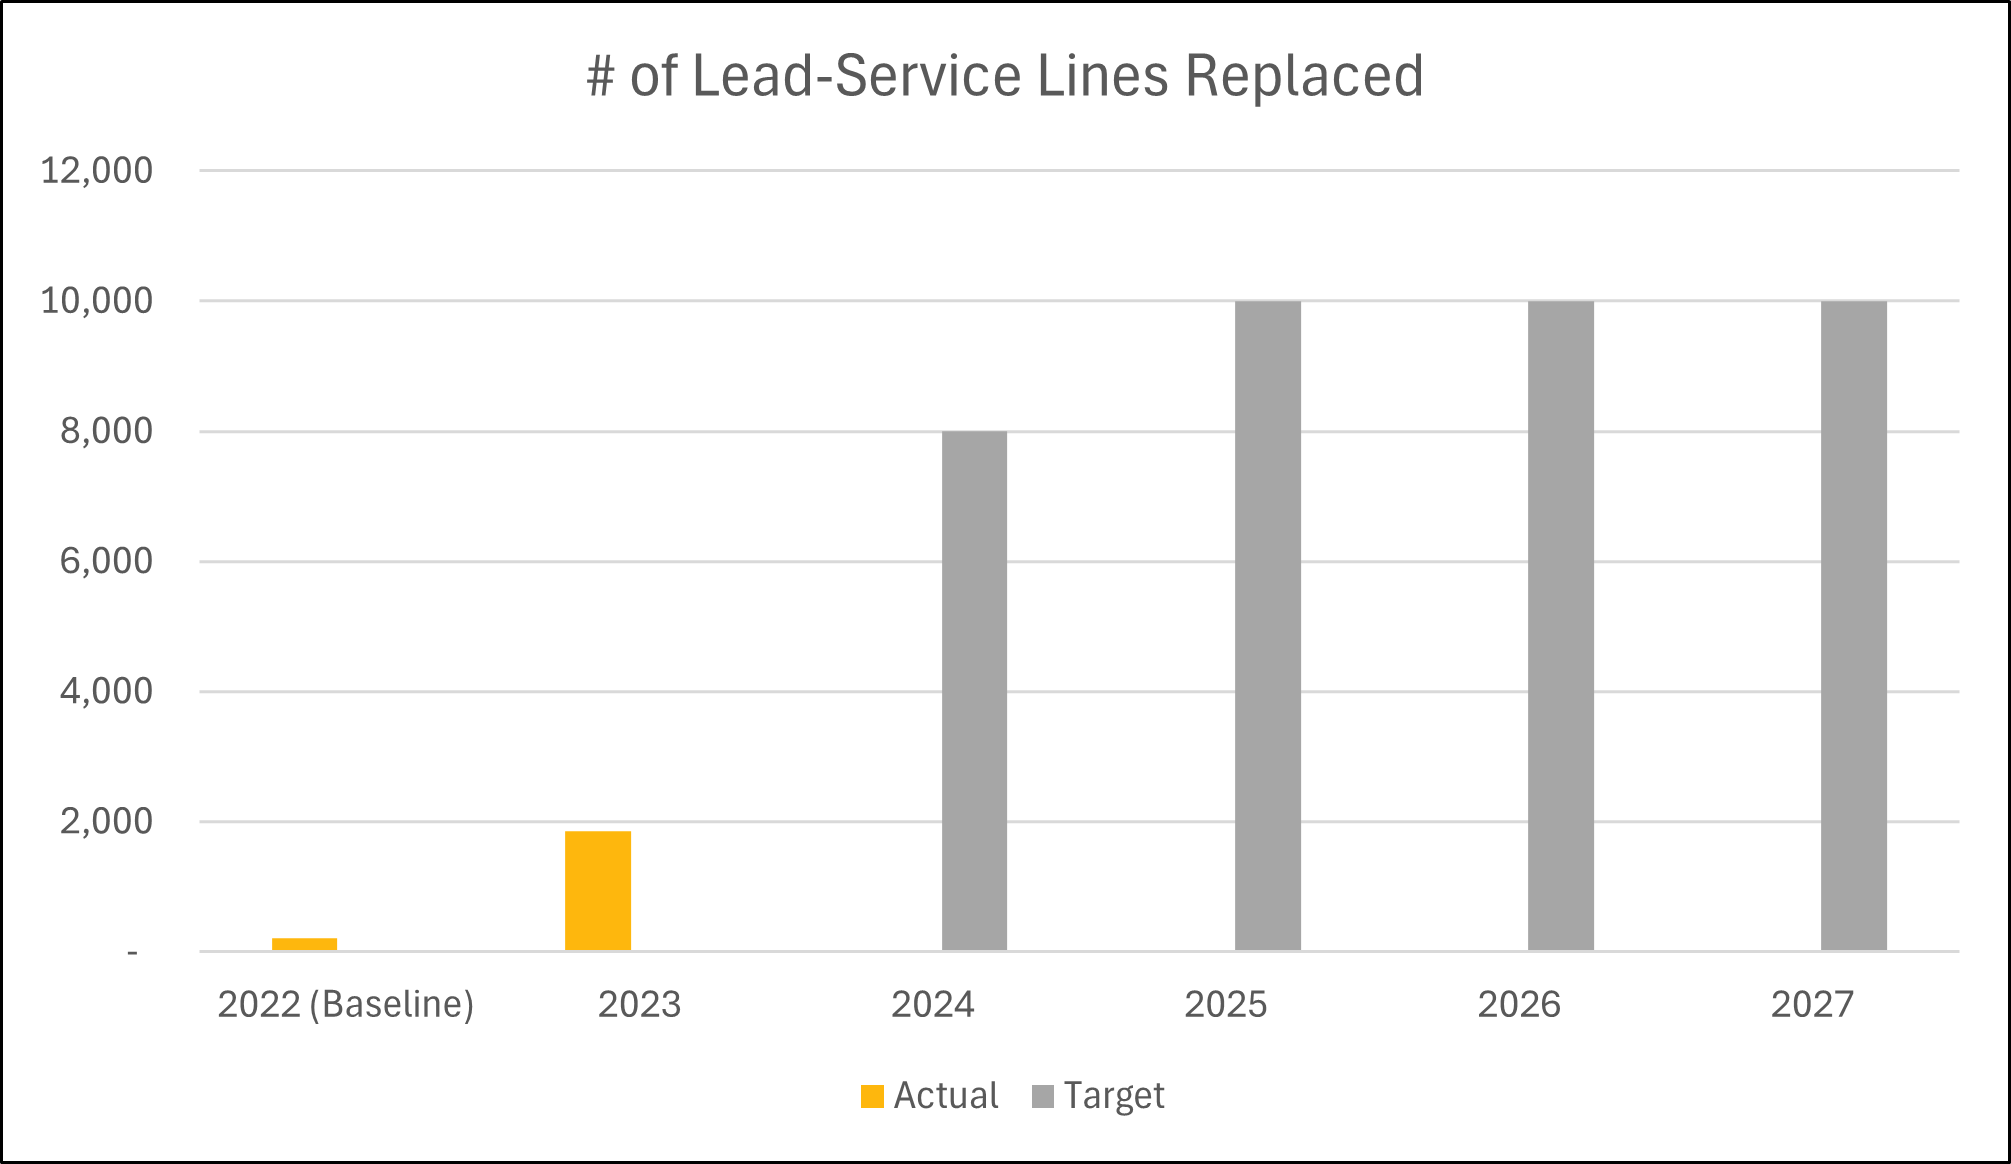 Lead-service Lines Replaced graph